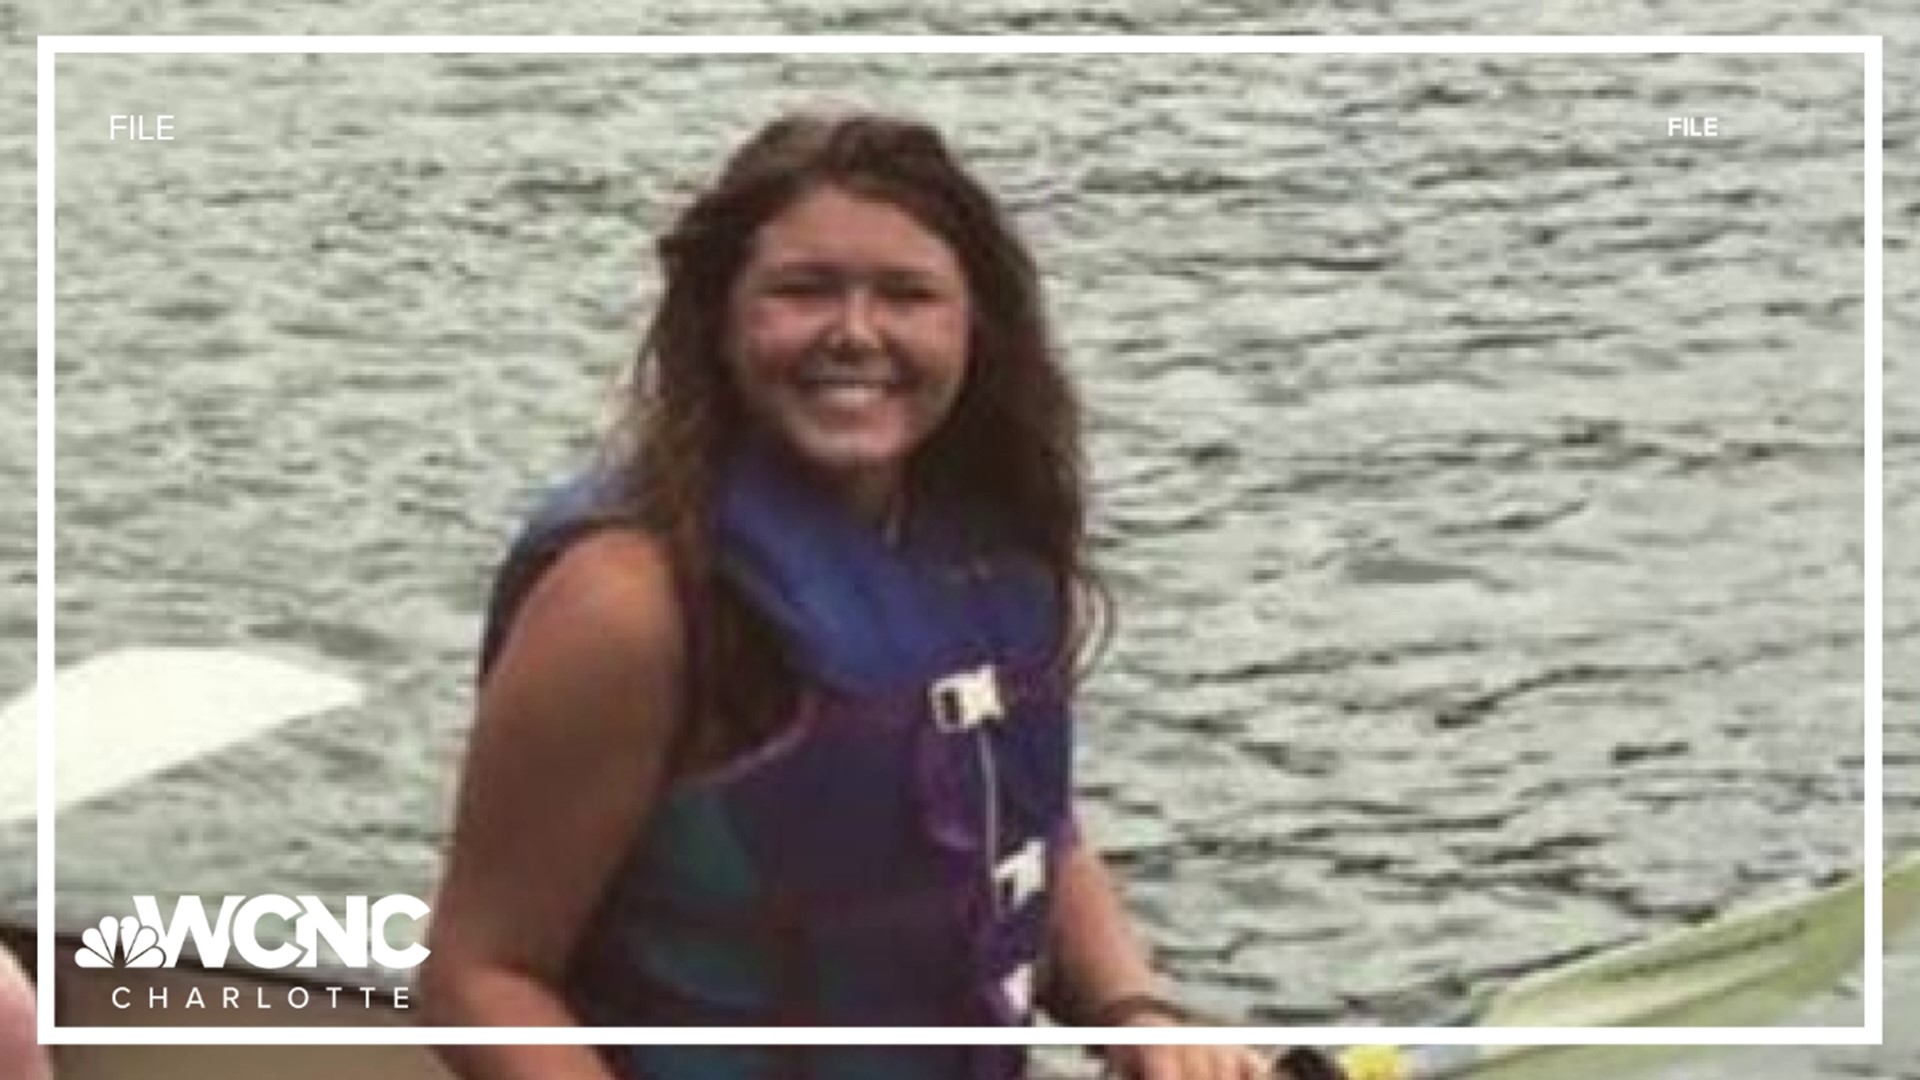 The law was named after a Concord girl who was killed in a boat crash in 2020.